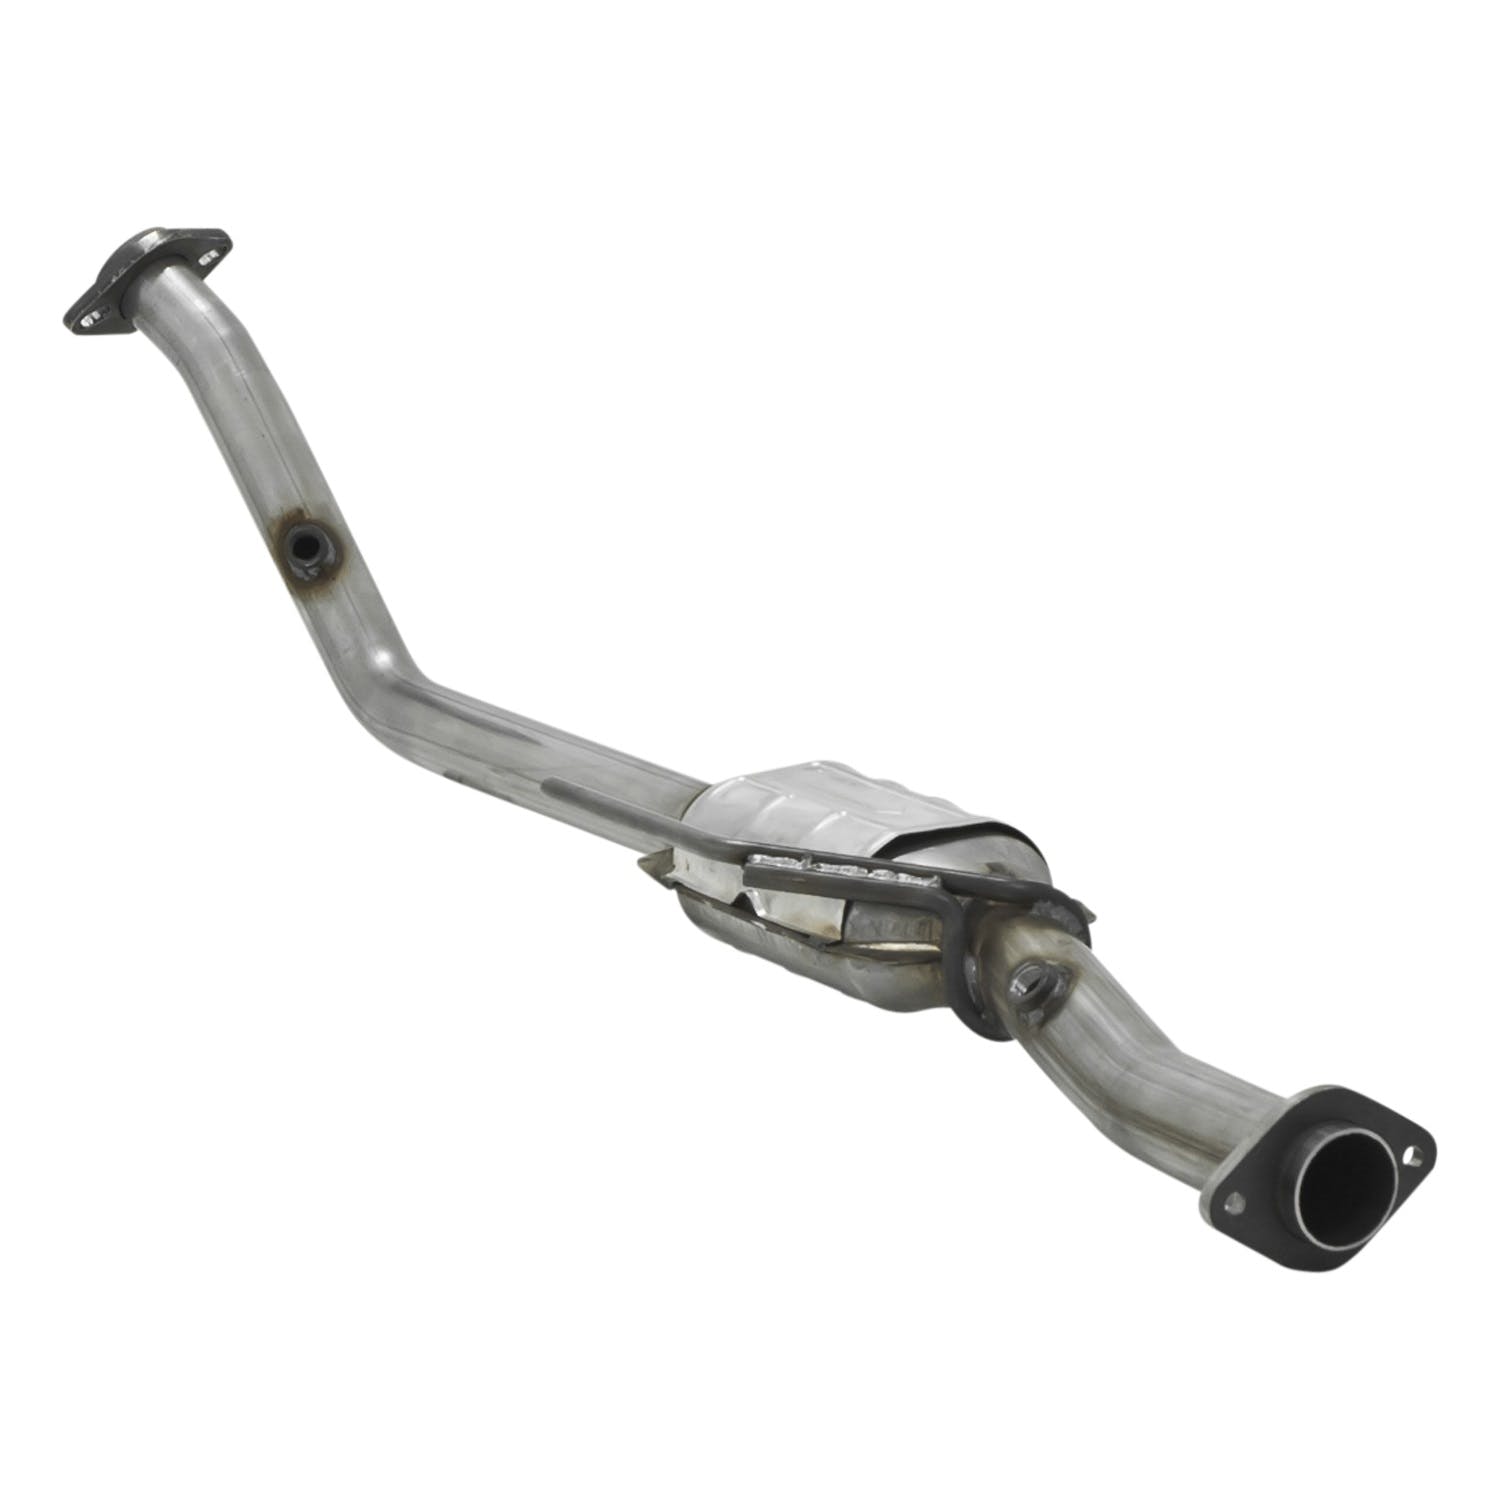 Flowmaster Catalytic Converters 2020031 Catalytic Converter-Direct Fit-2.00 Inlet 2.25 in. Outlet-49 State